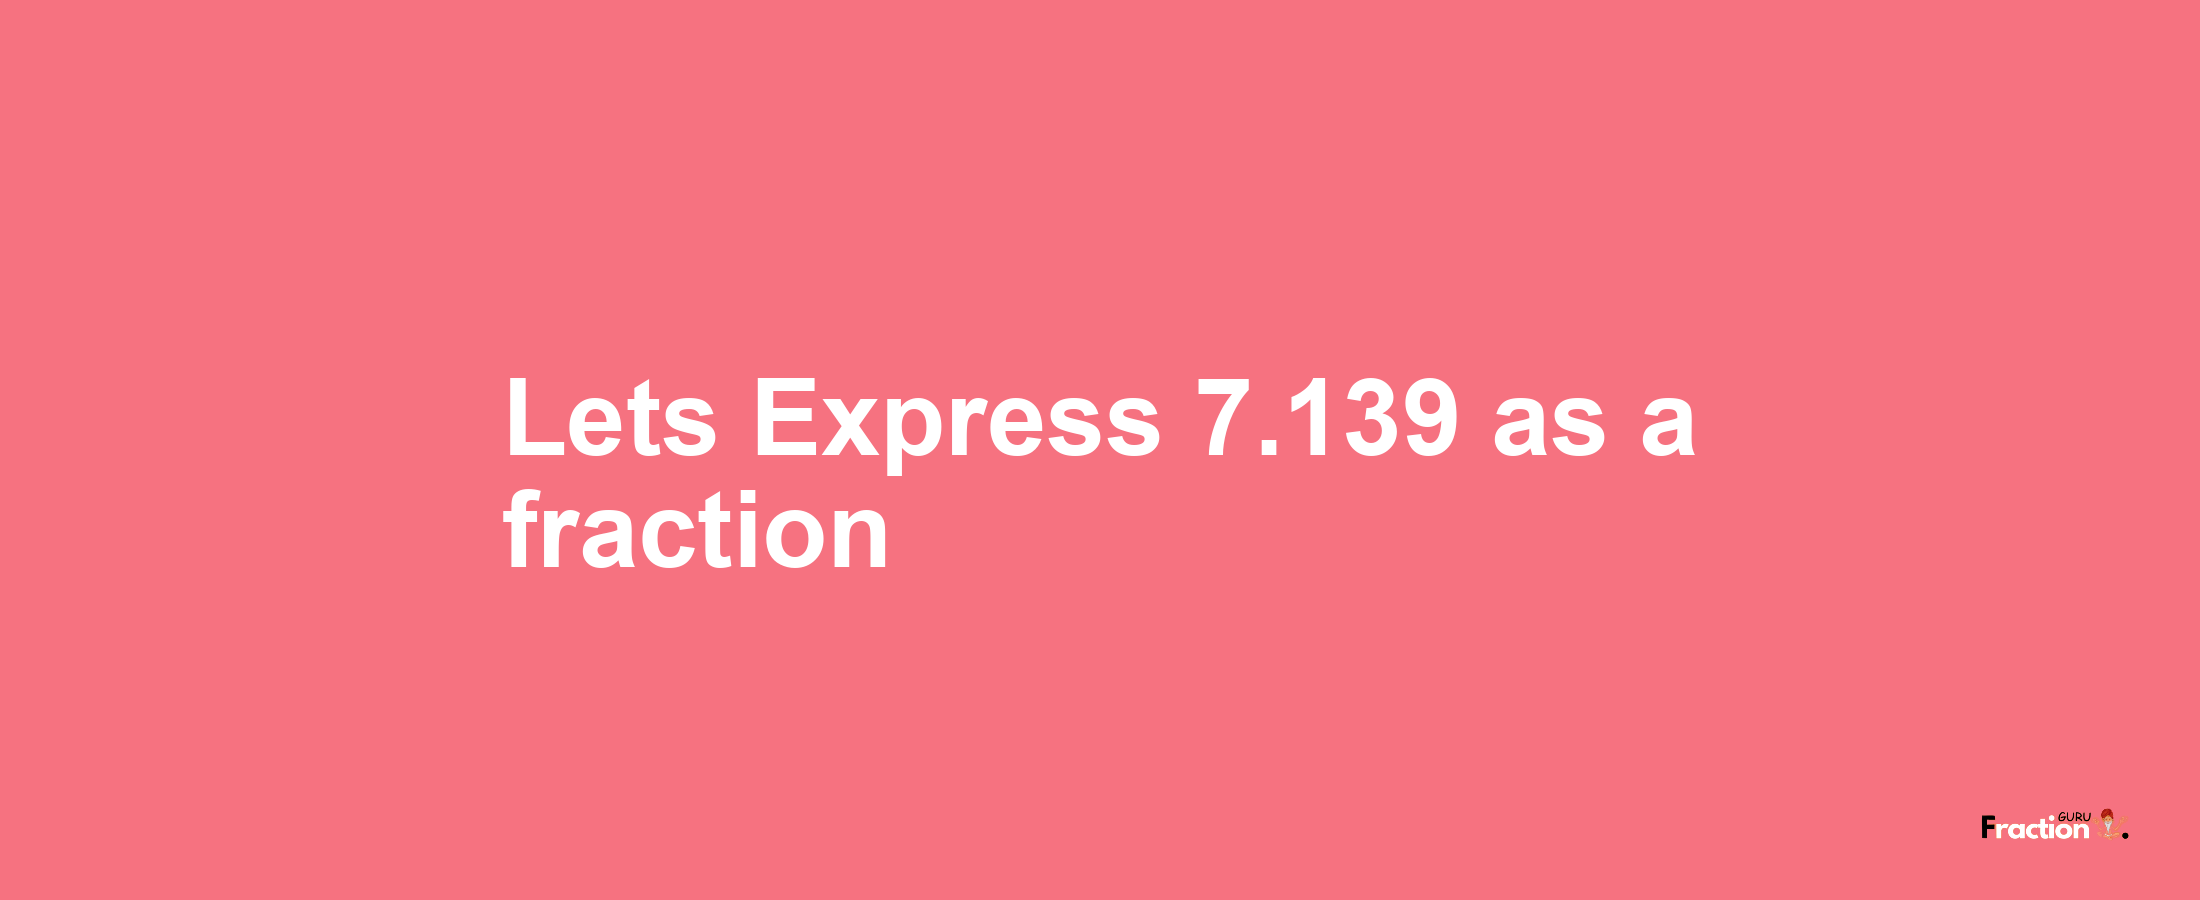 Lets Express 7.139 as afraction